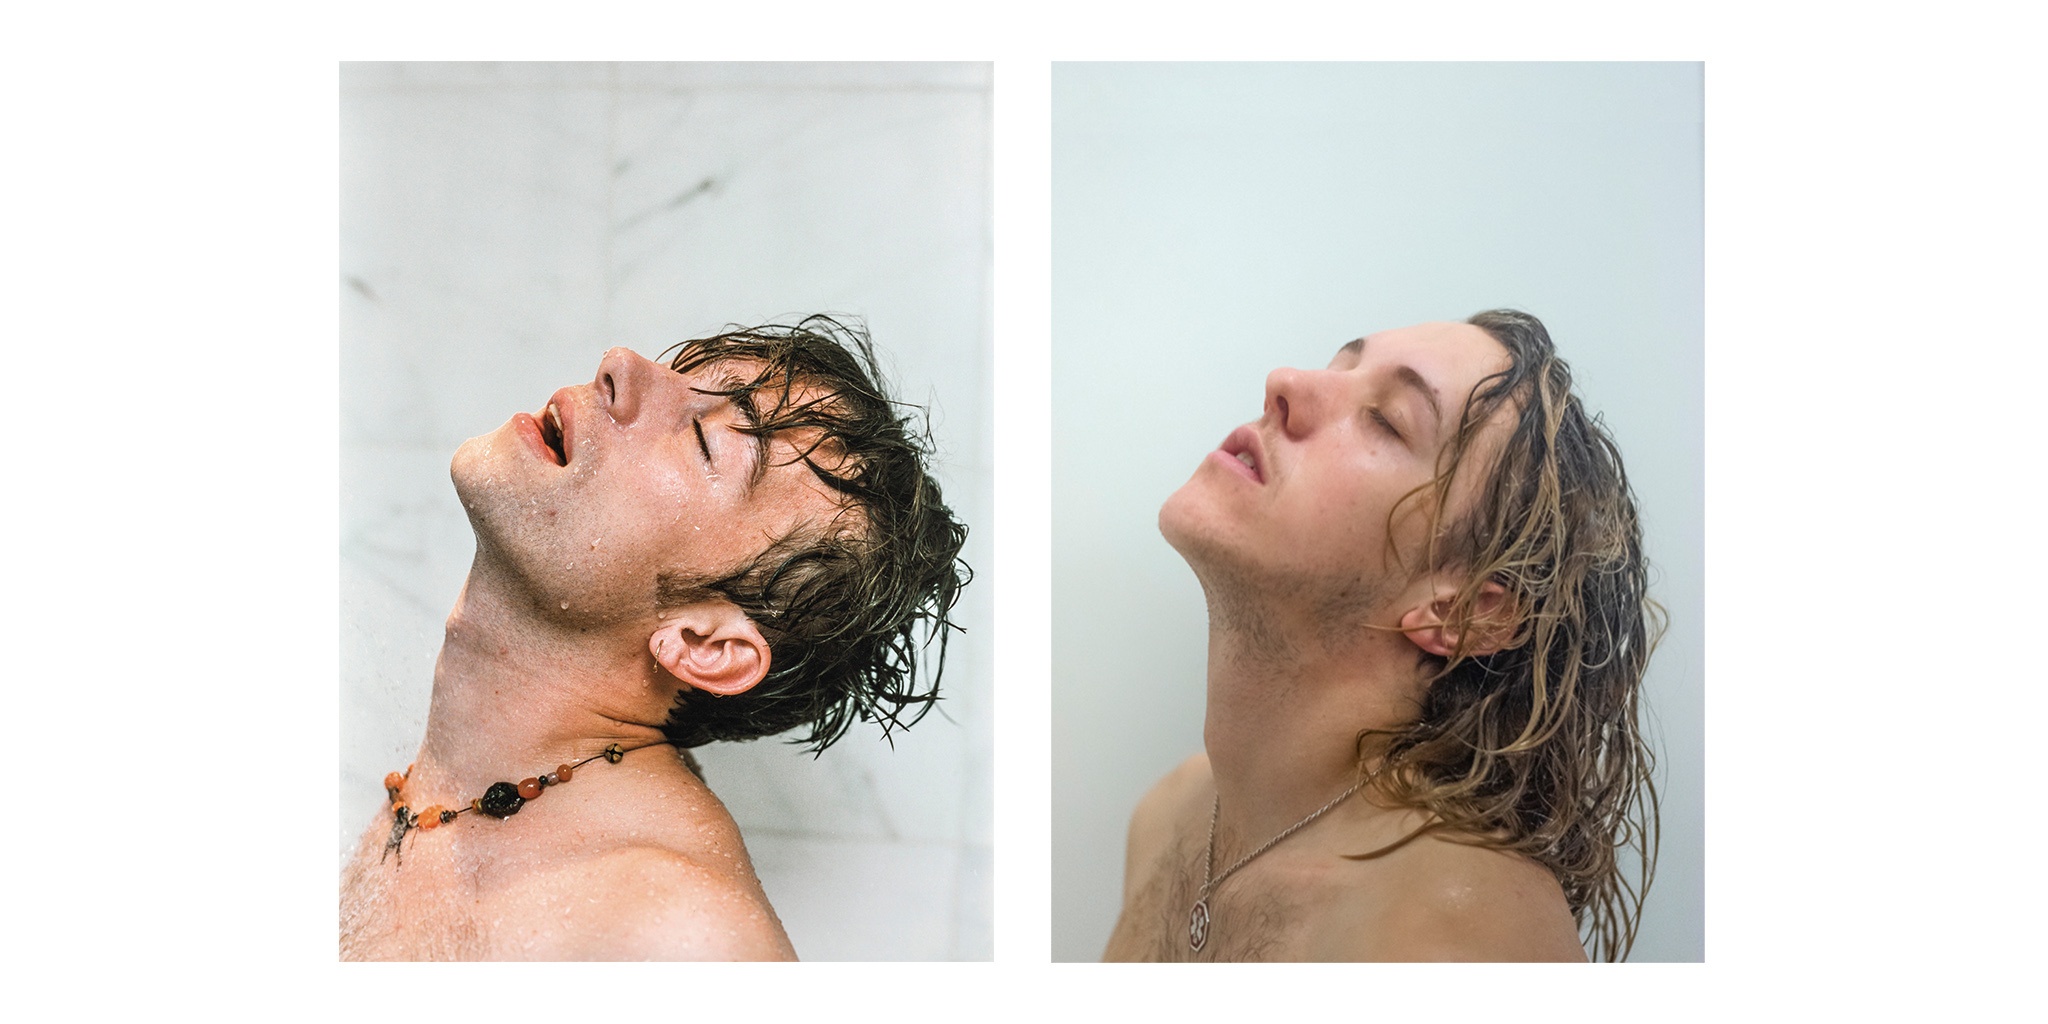 [Wolfgang Tillmans's _Damon, shower, head up (Damon Albarn)_, 1995, chromogenic print on Fujicolor paper, 13 x 9 1/2 inches, The Jack Shear Collection of Photography at the Tang Teaching Museum, 2015.1.122](https://tang.skidmore.edu/collection/artworks/238-damon-shower-head-up-damon-albarn) re-created by Dea Sumrall '20